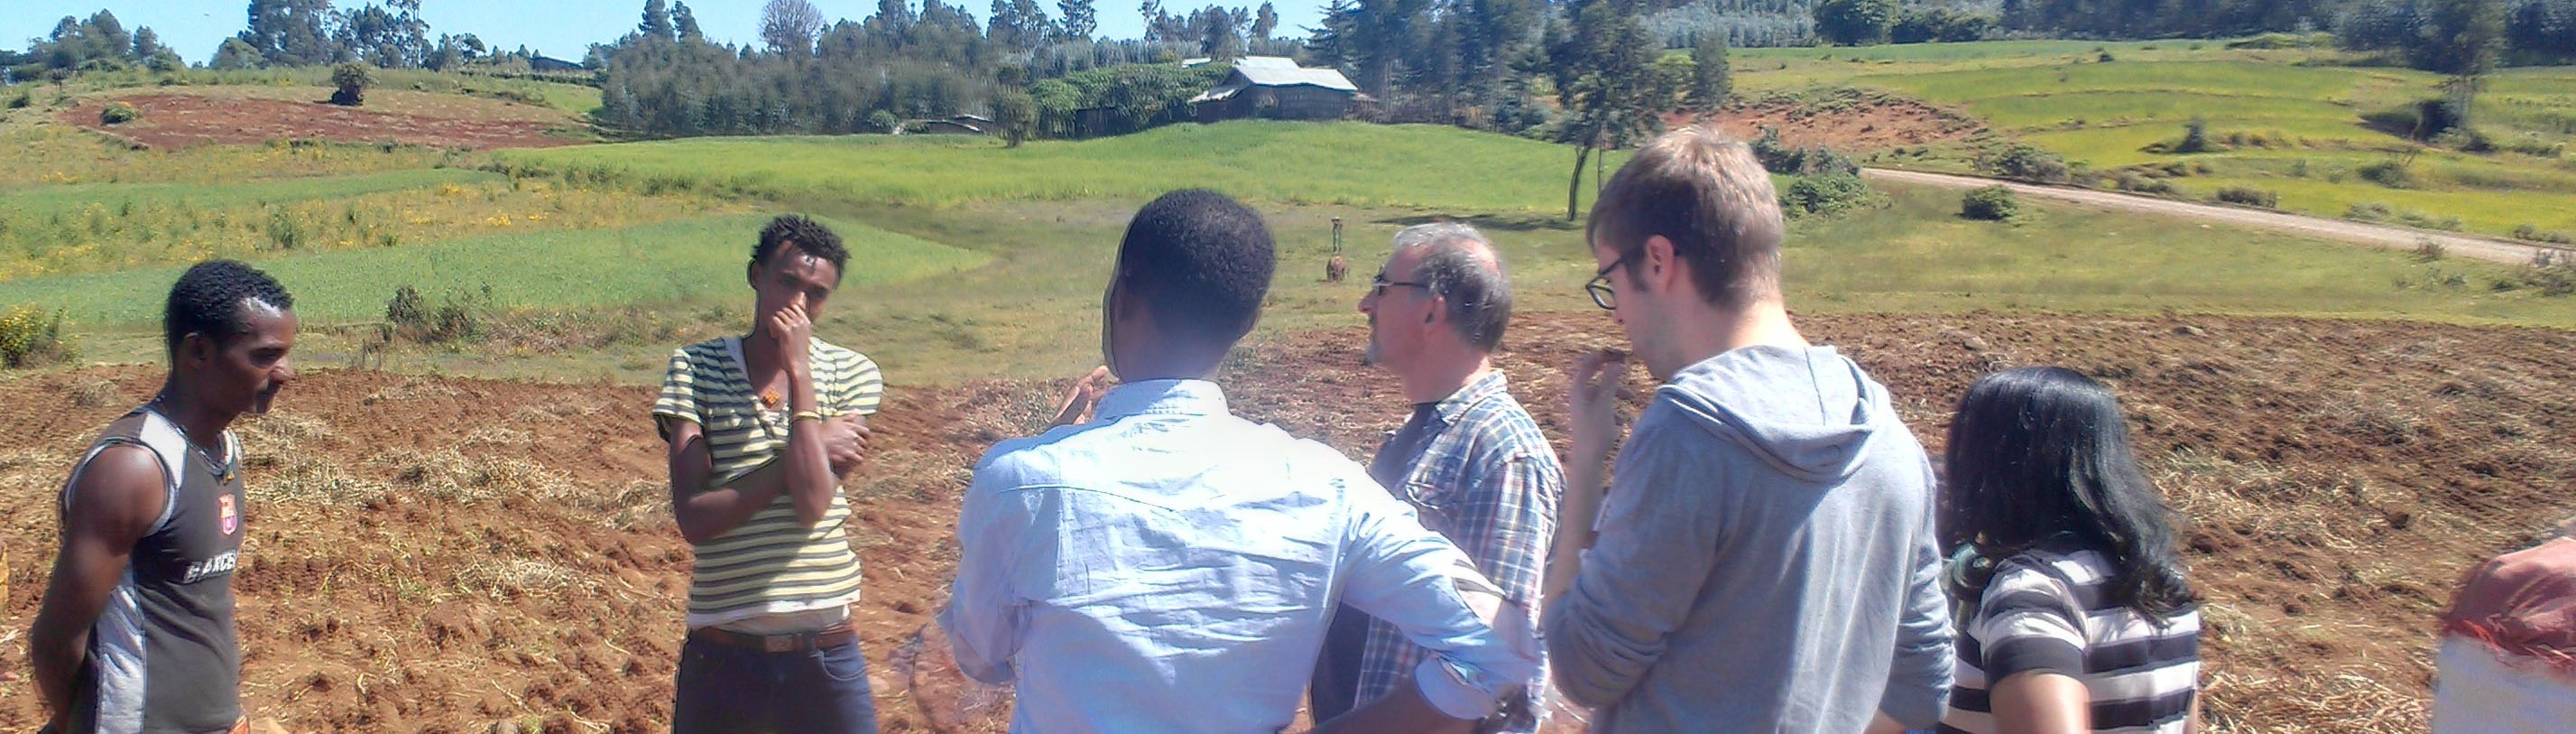 Field visit by the project team, Oct. 17, 2017 in Gendeberet, Ethiopia